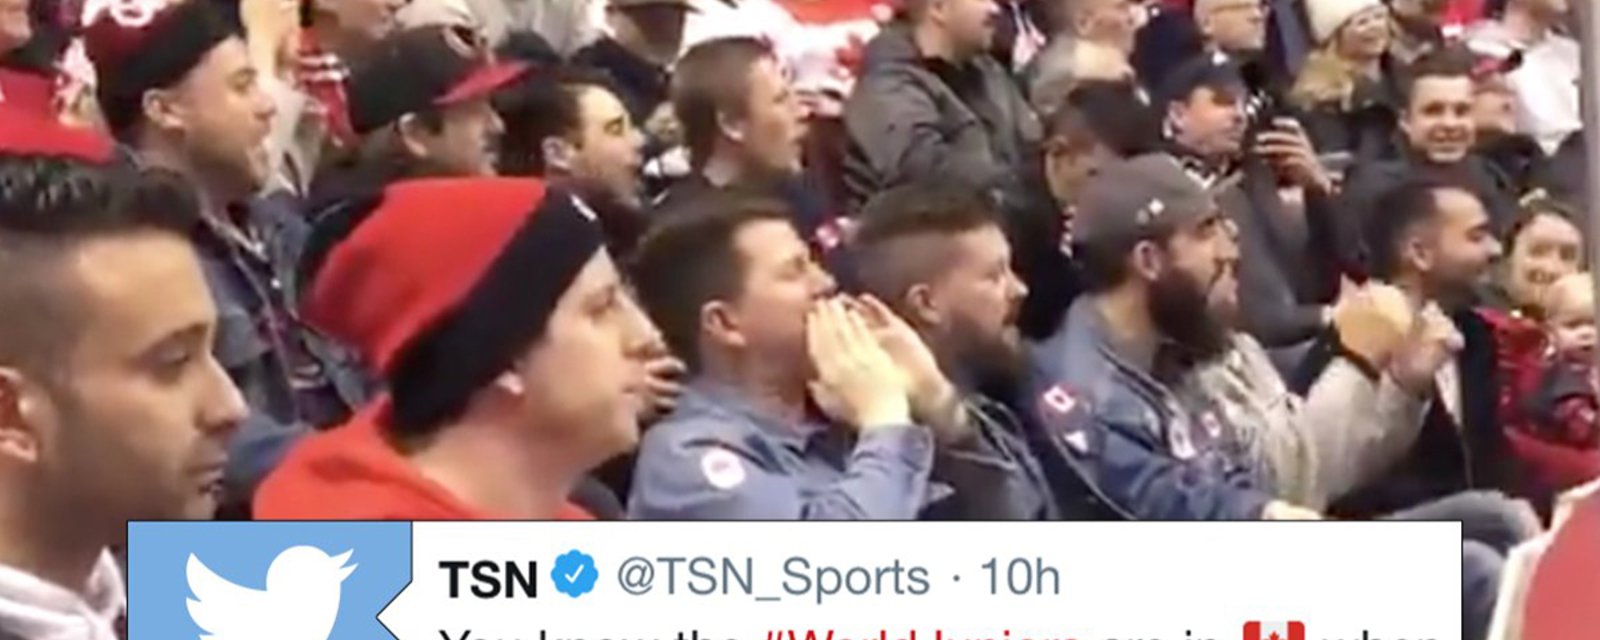 Watch: Canadian fans chant “Maple Syrup!” During team’s 14-0 win over Denmark